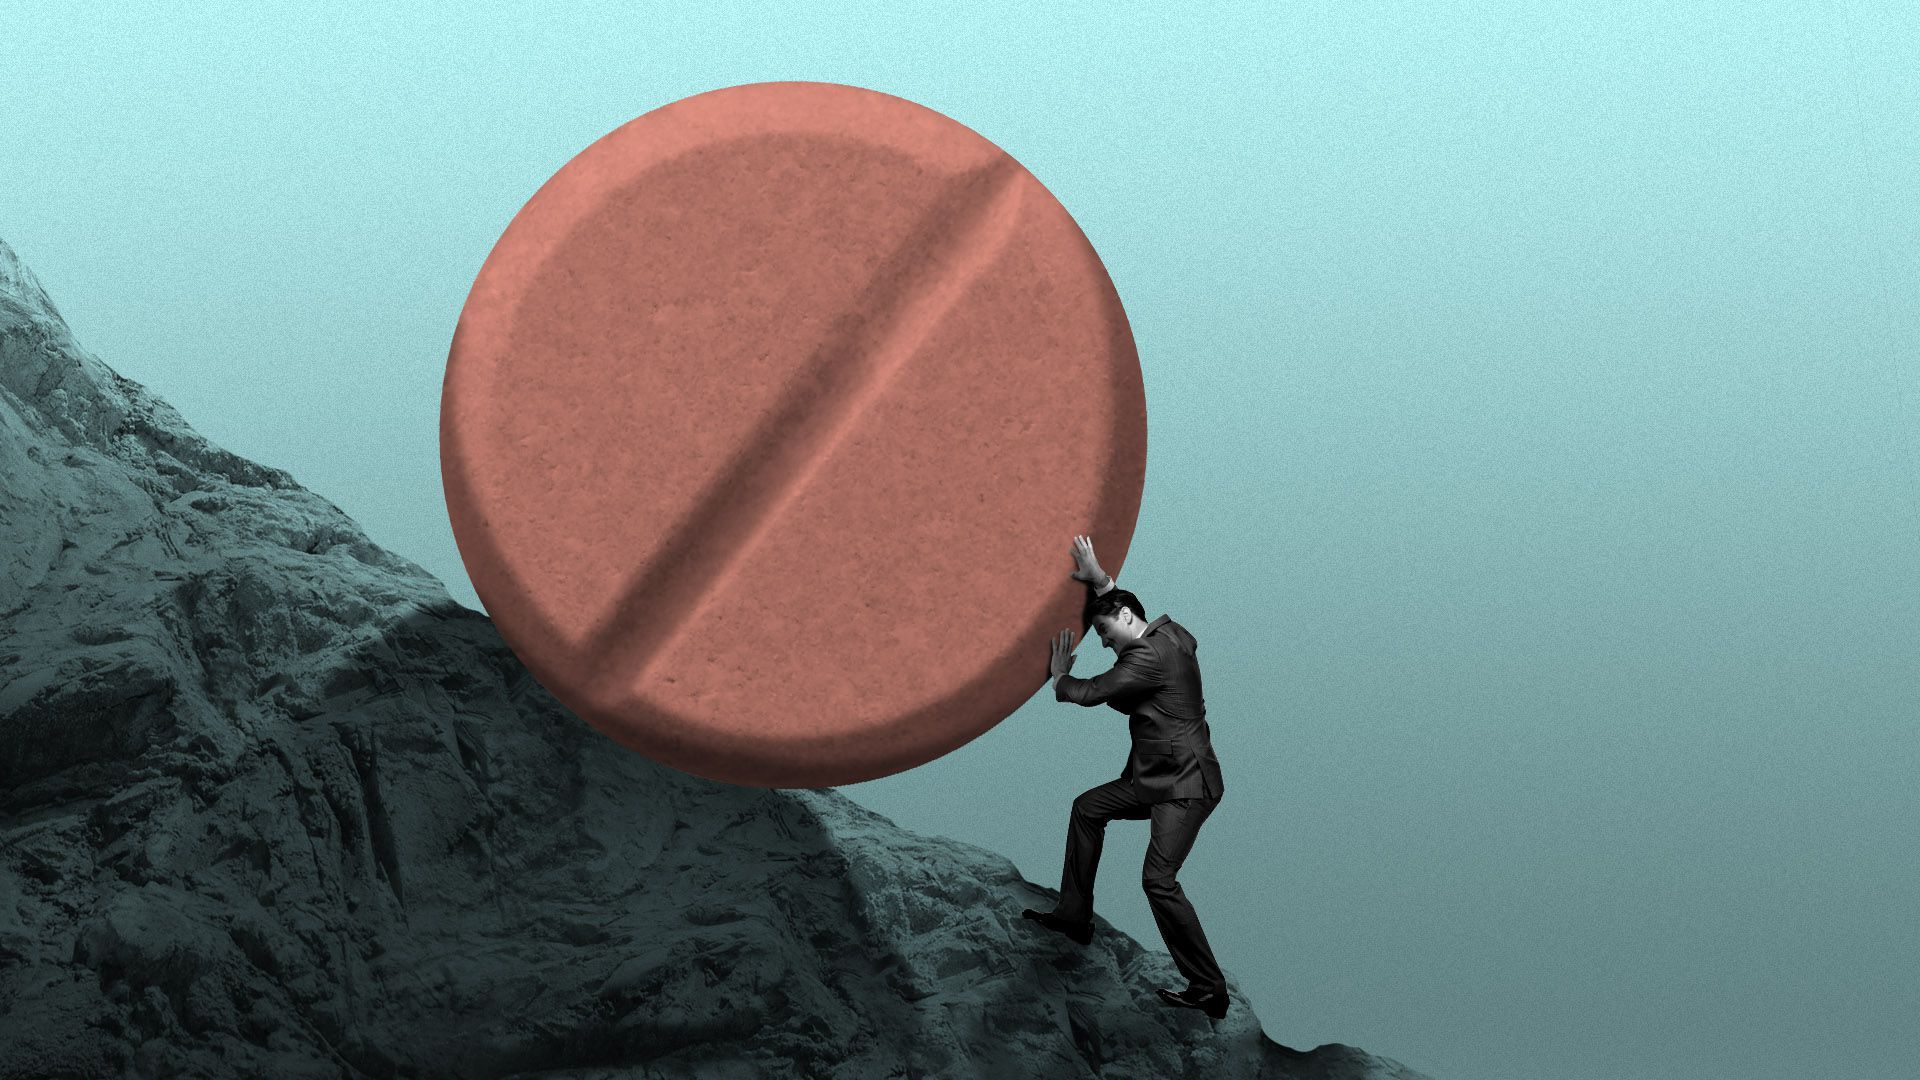 Illustration of a man pushing a giant pill up a hill